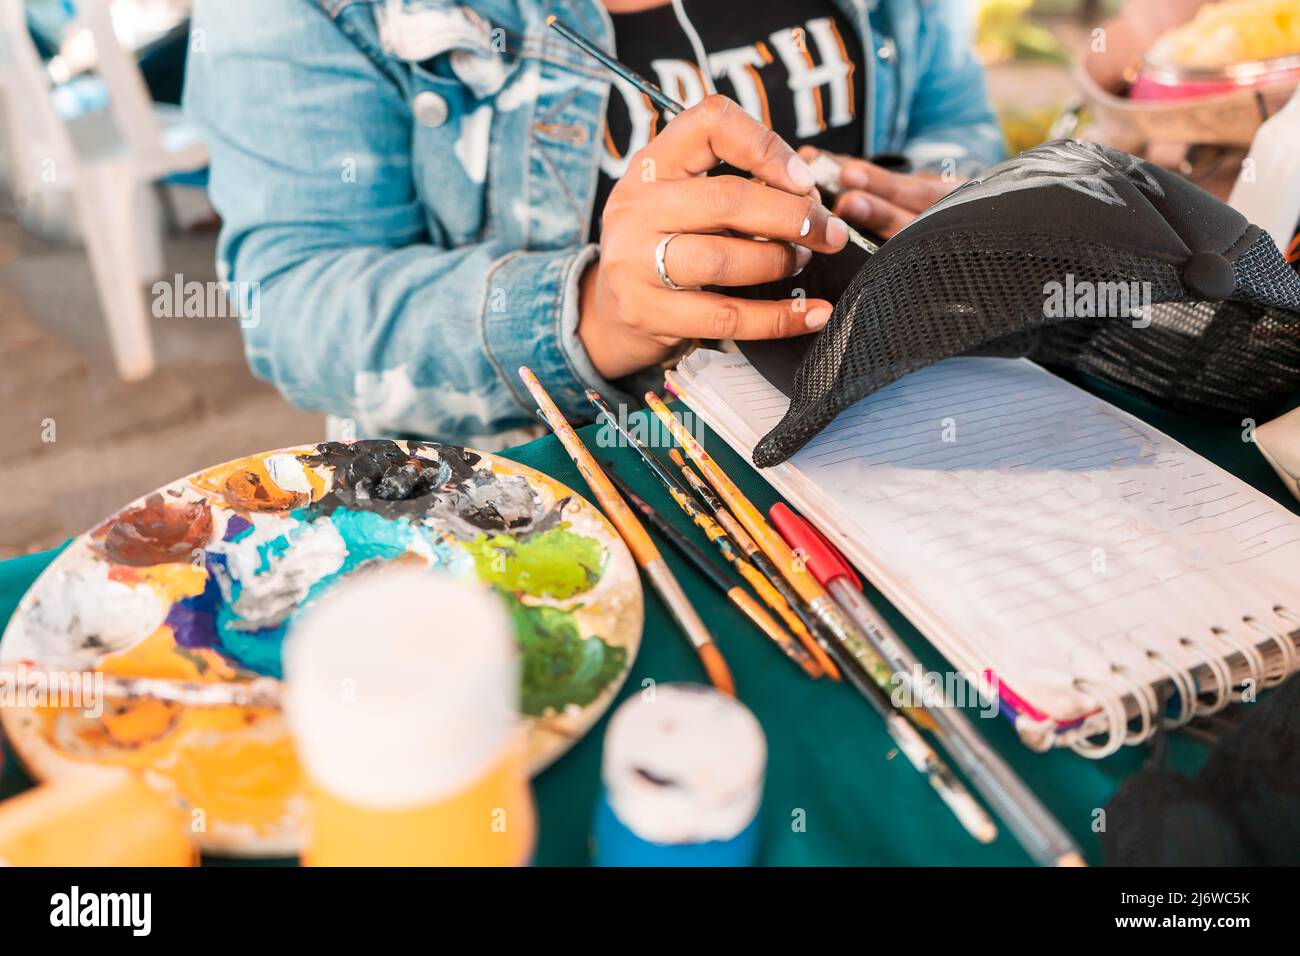 Closeup to the hands of a Latin woman customizing a cap with a brush and paint. Concept of art and entrepreneurship Stock Photo